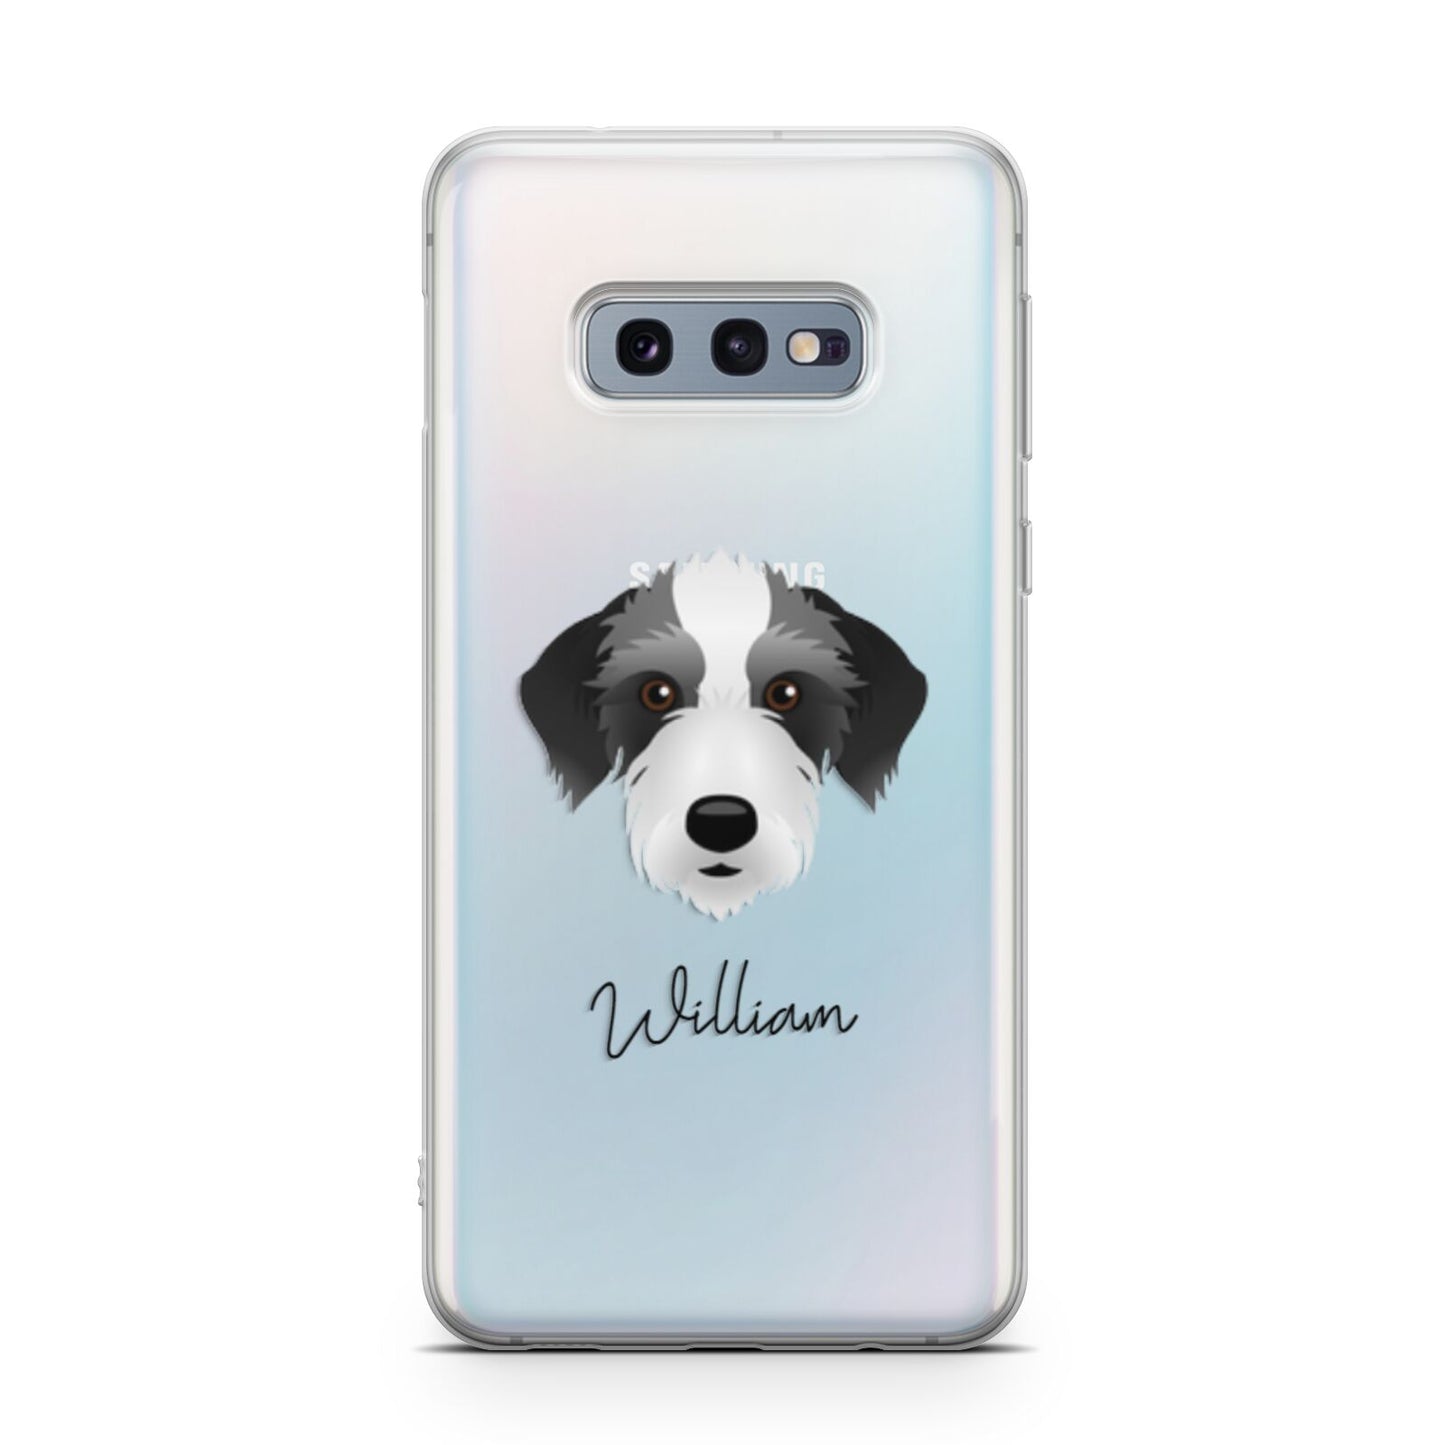 Bedlington Whippet Personalised Samsung Galaxy S10E Case